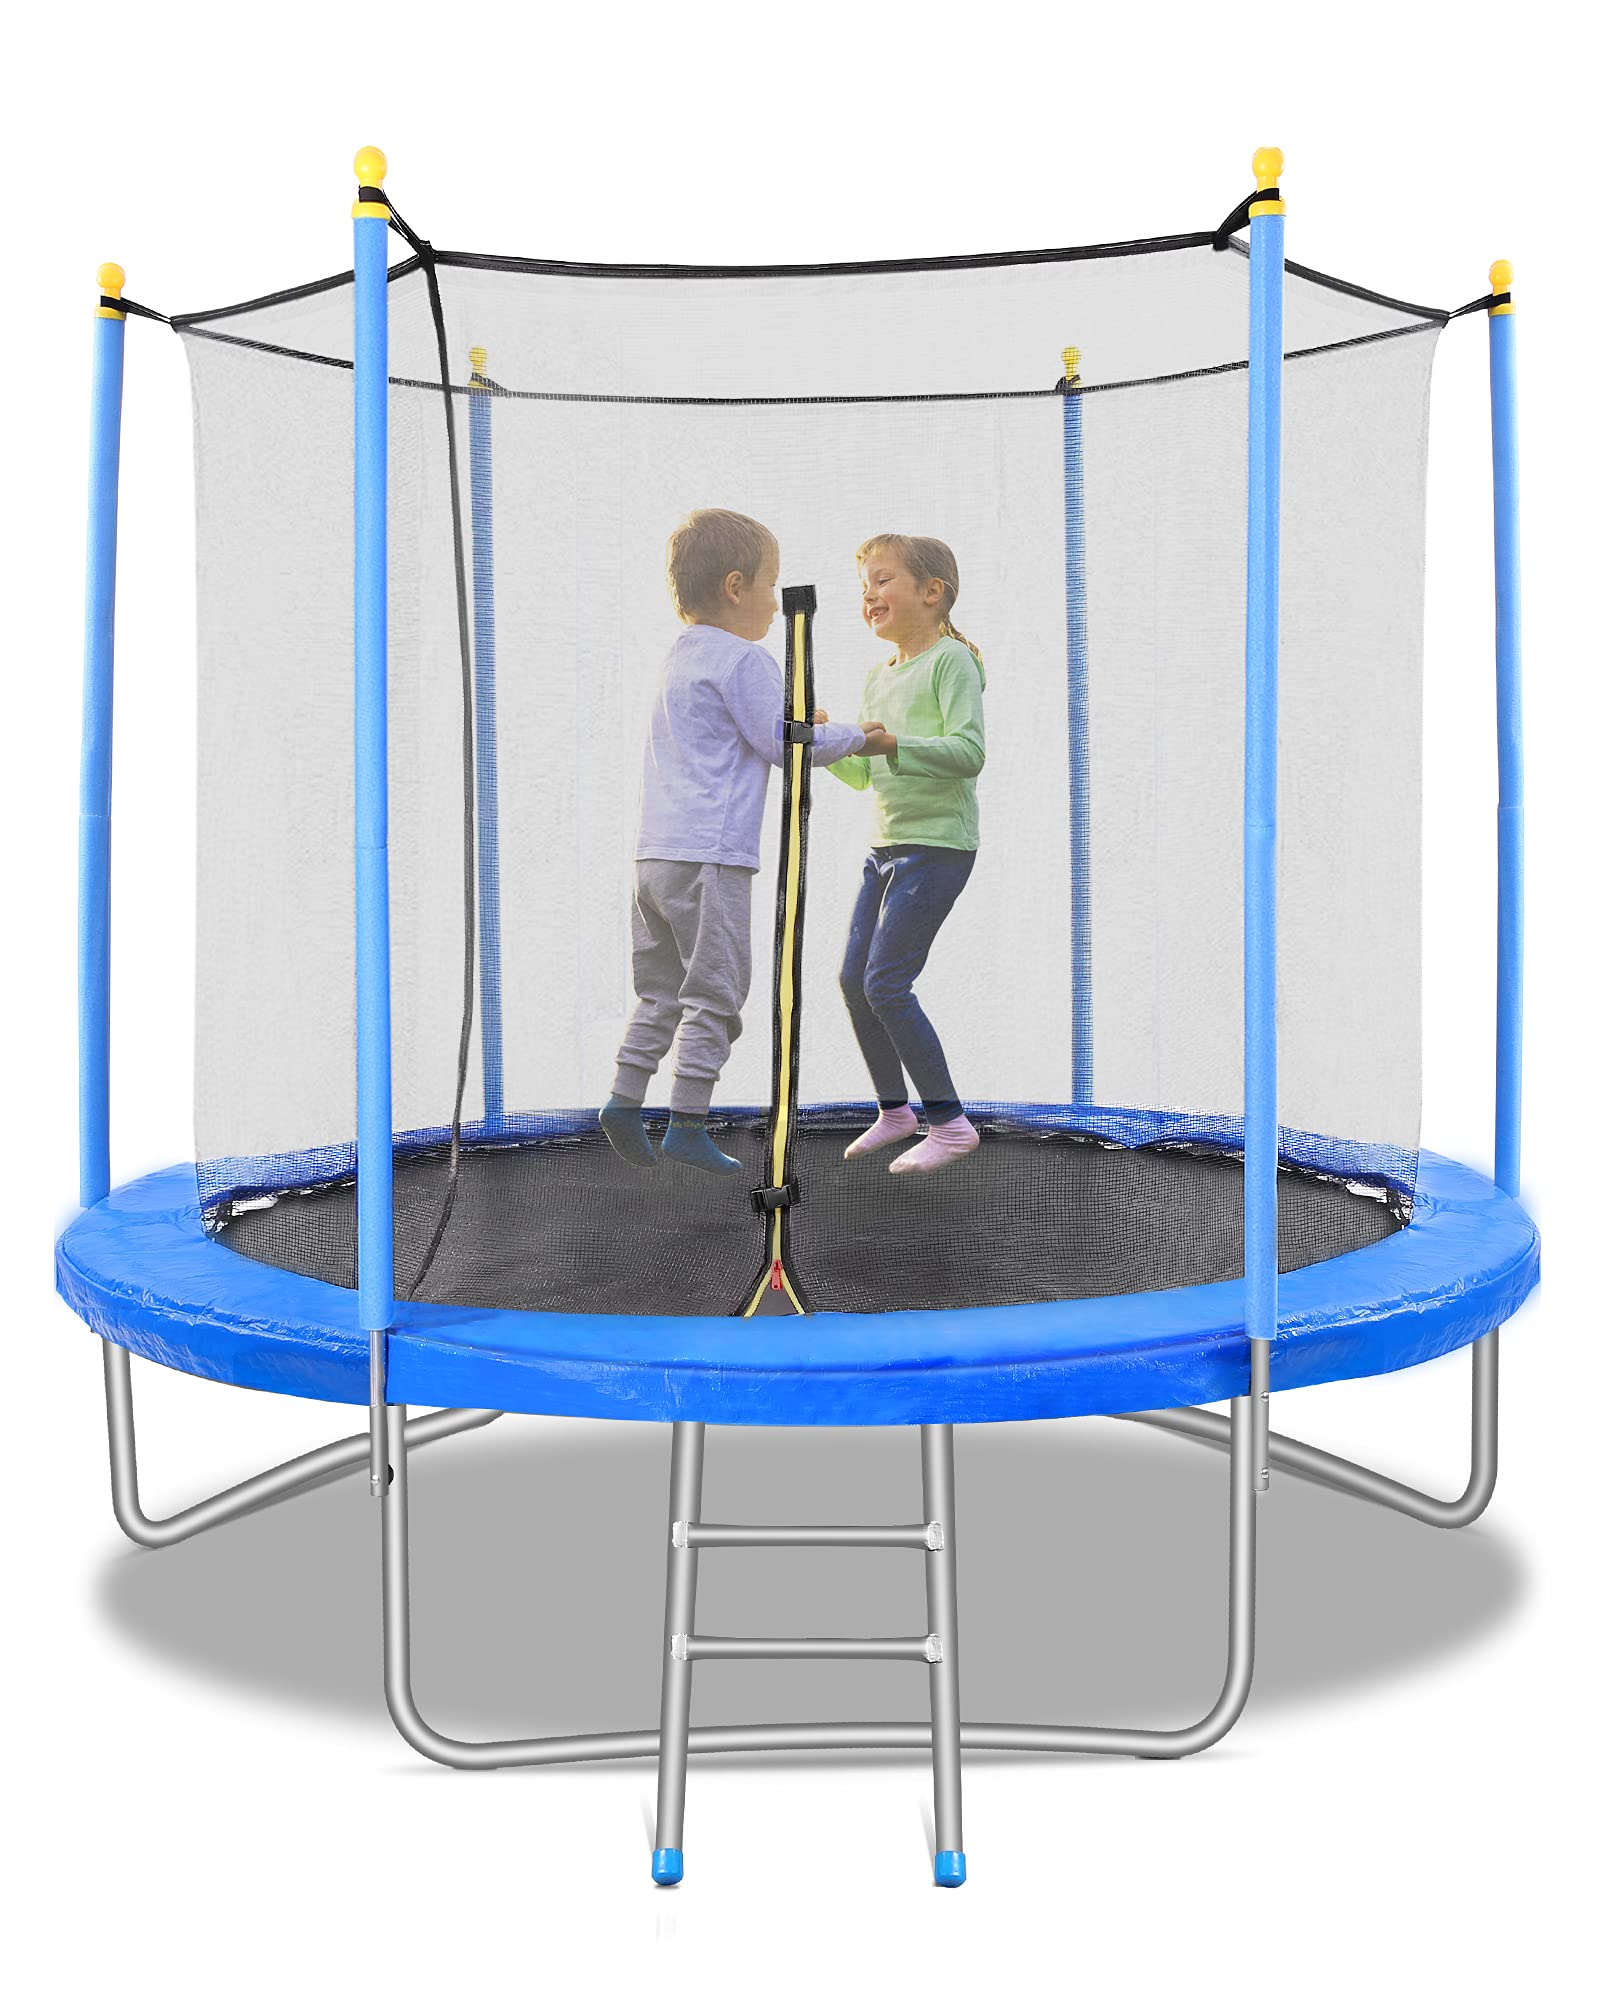 Load image into Gallery viewer, MARNUR 8 FT Trampoline for Kids Outdoor Fitness Trampoline with Enclosure Net, Spring Cover, Ladder for Kids
